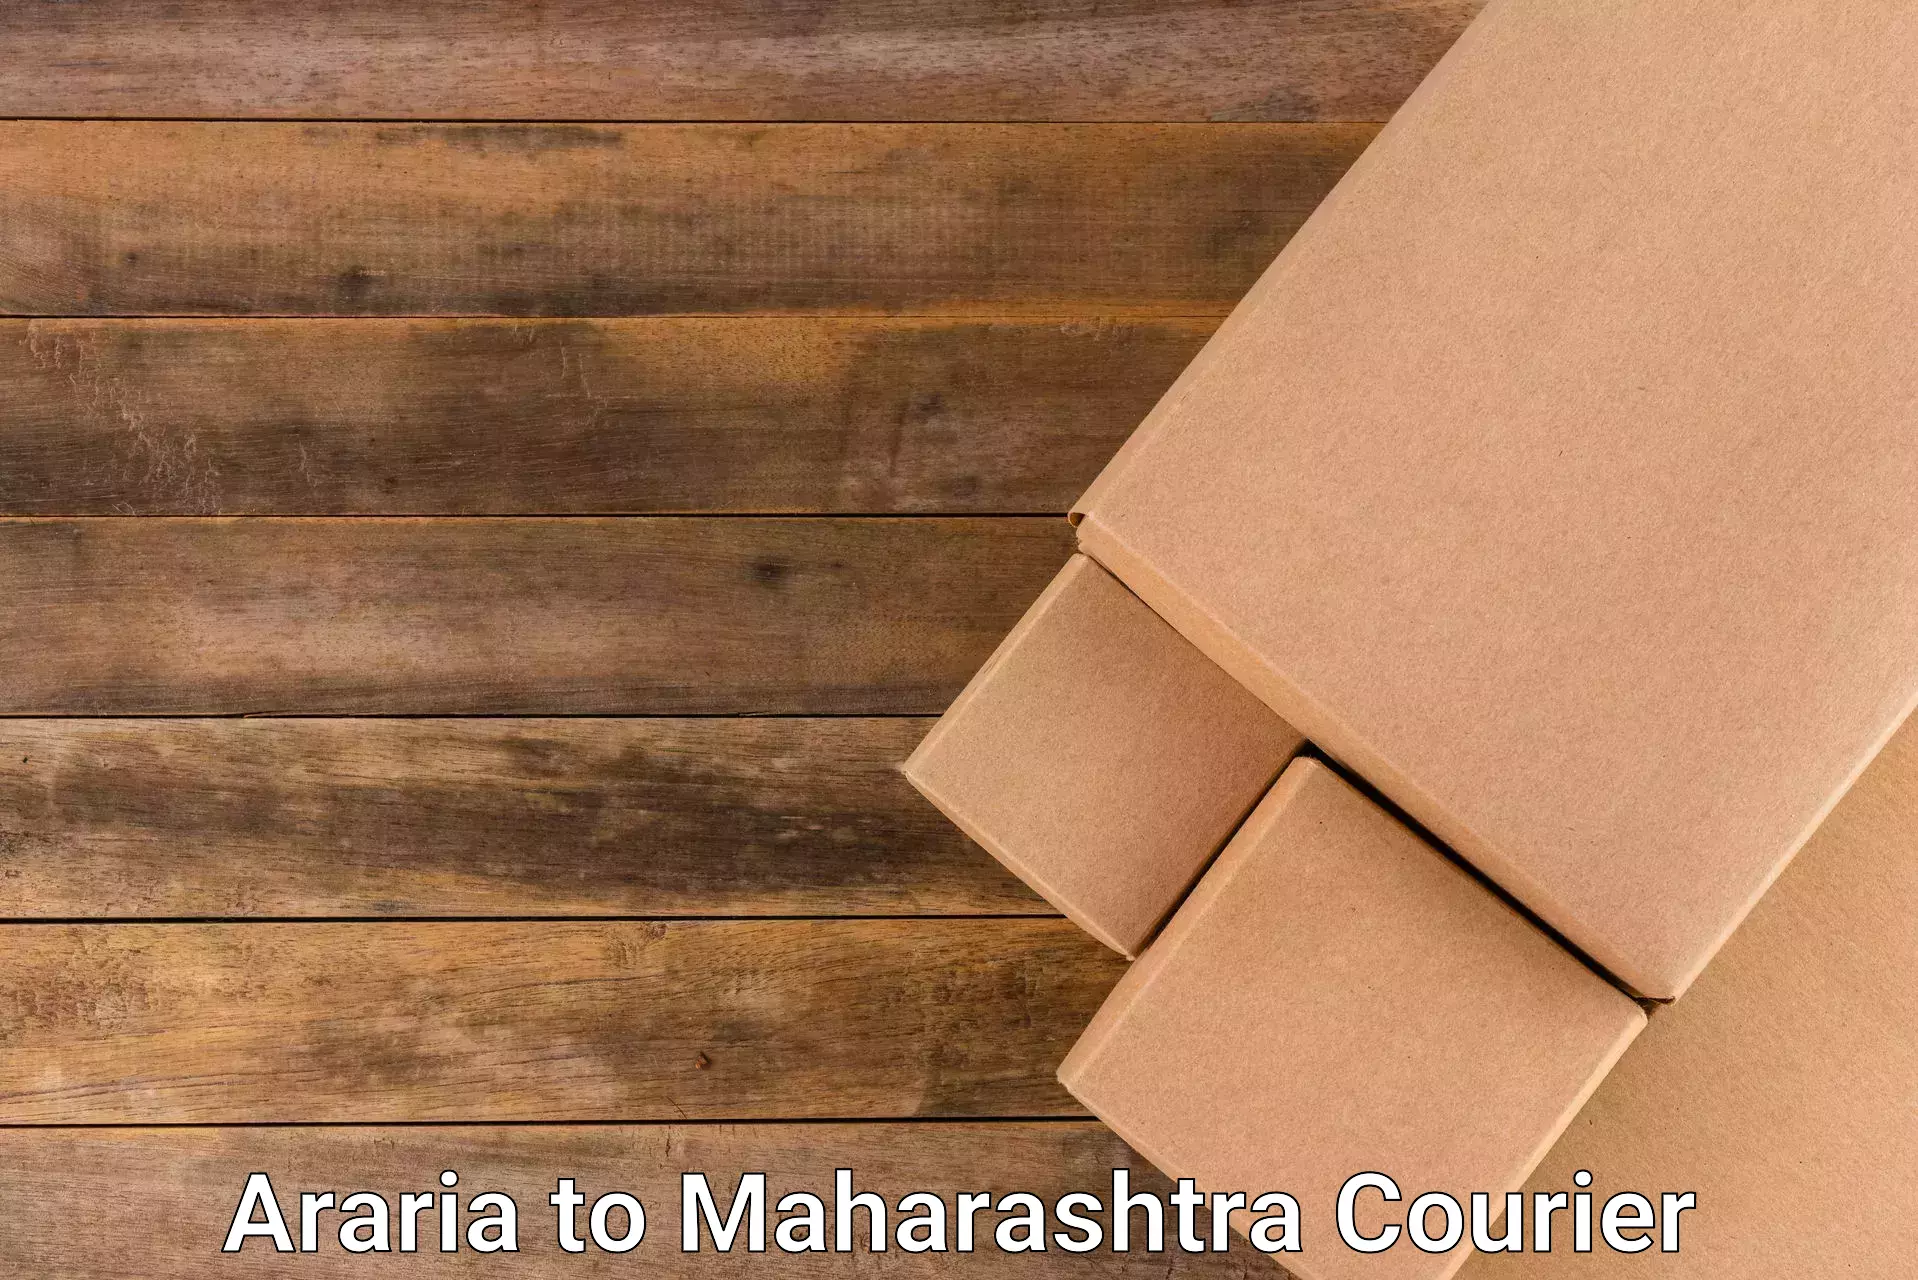 24-hour courier service Araria to Symbiosis International Pune